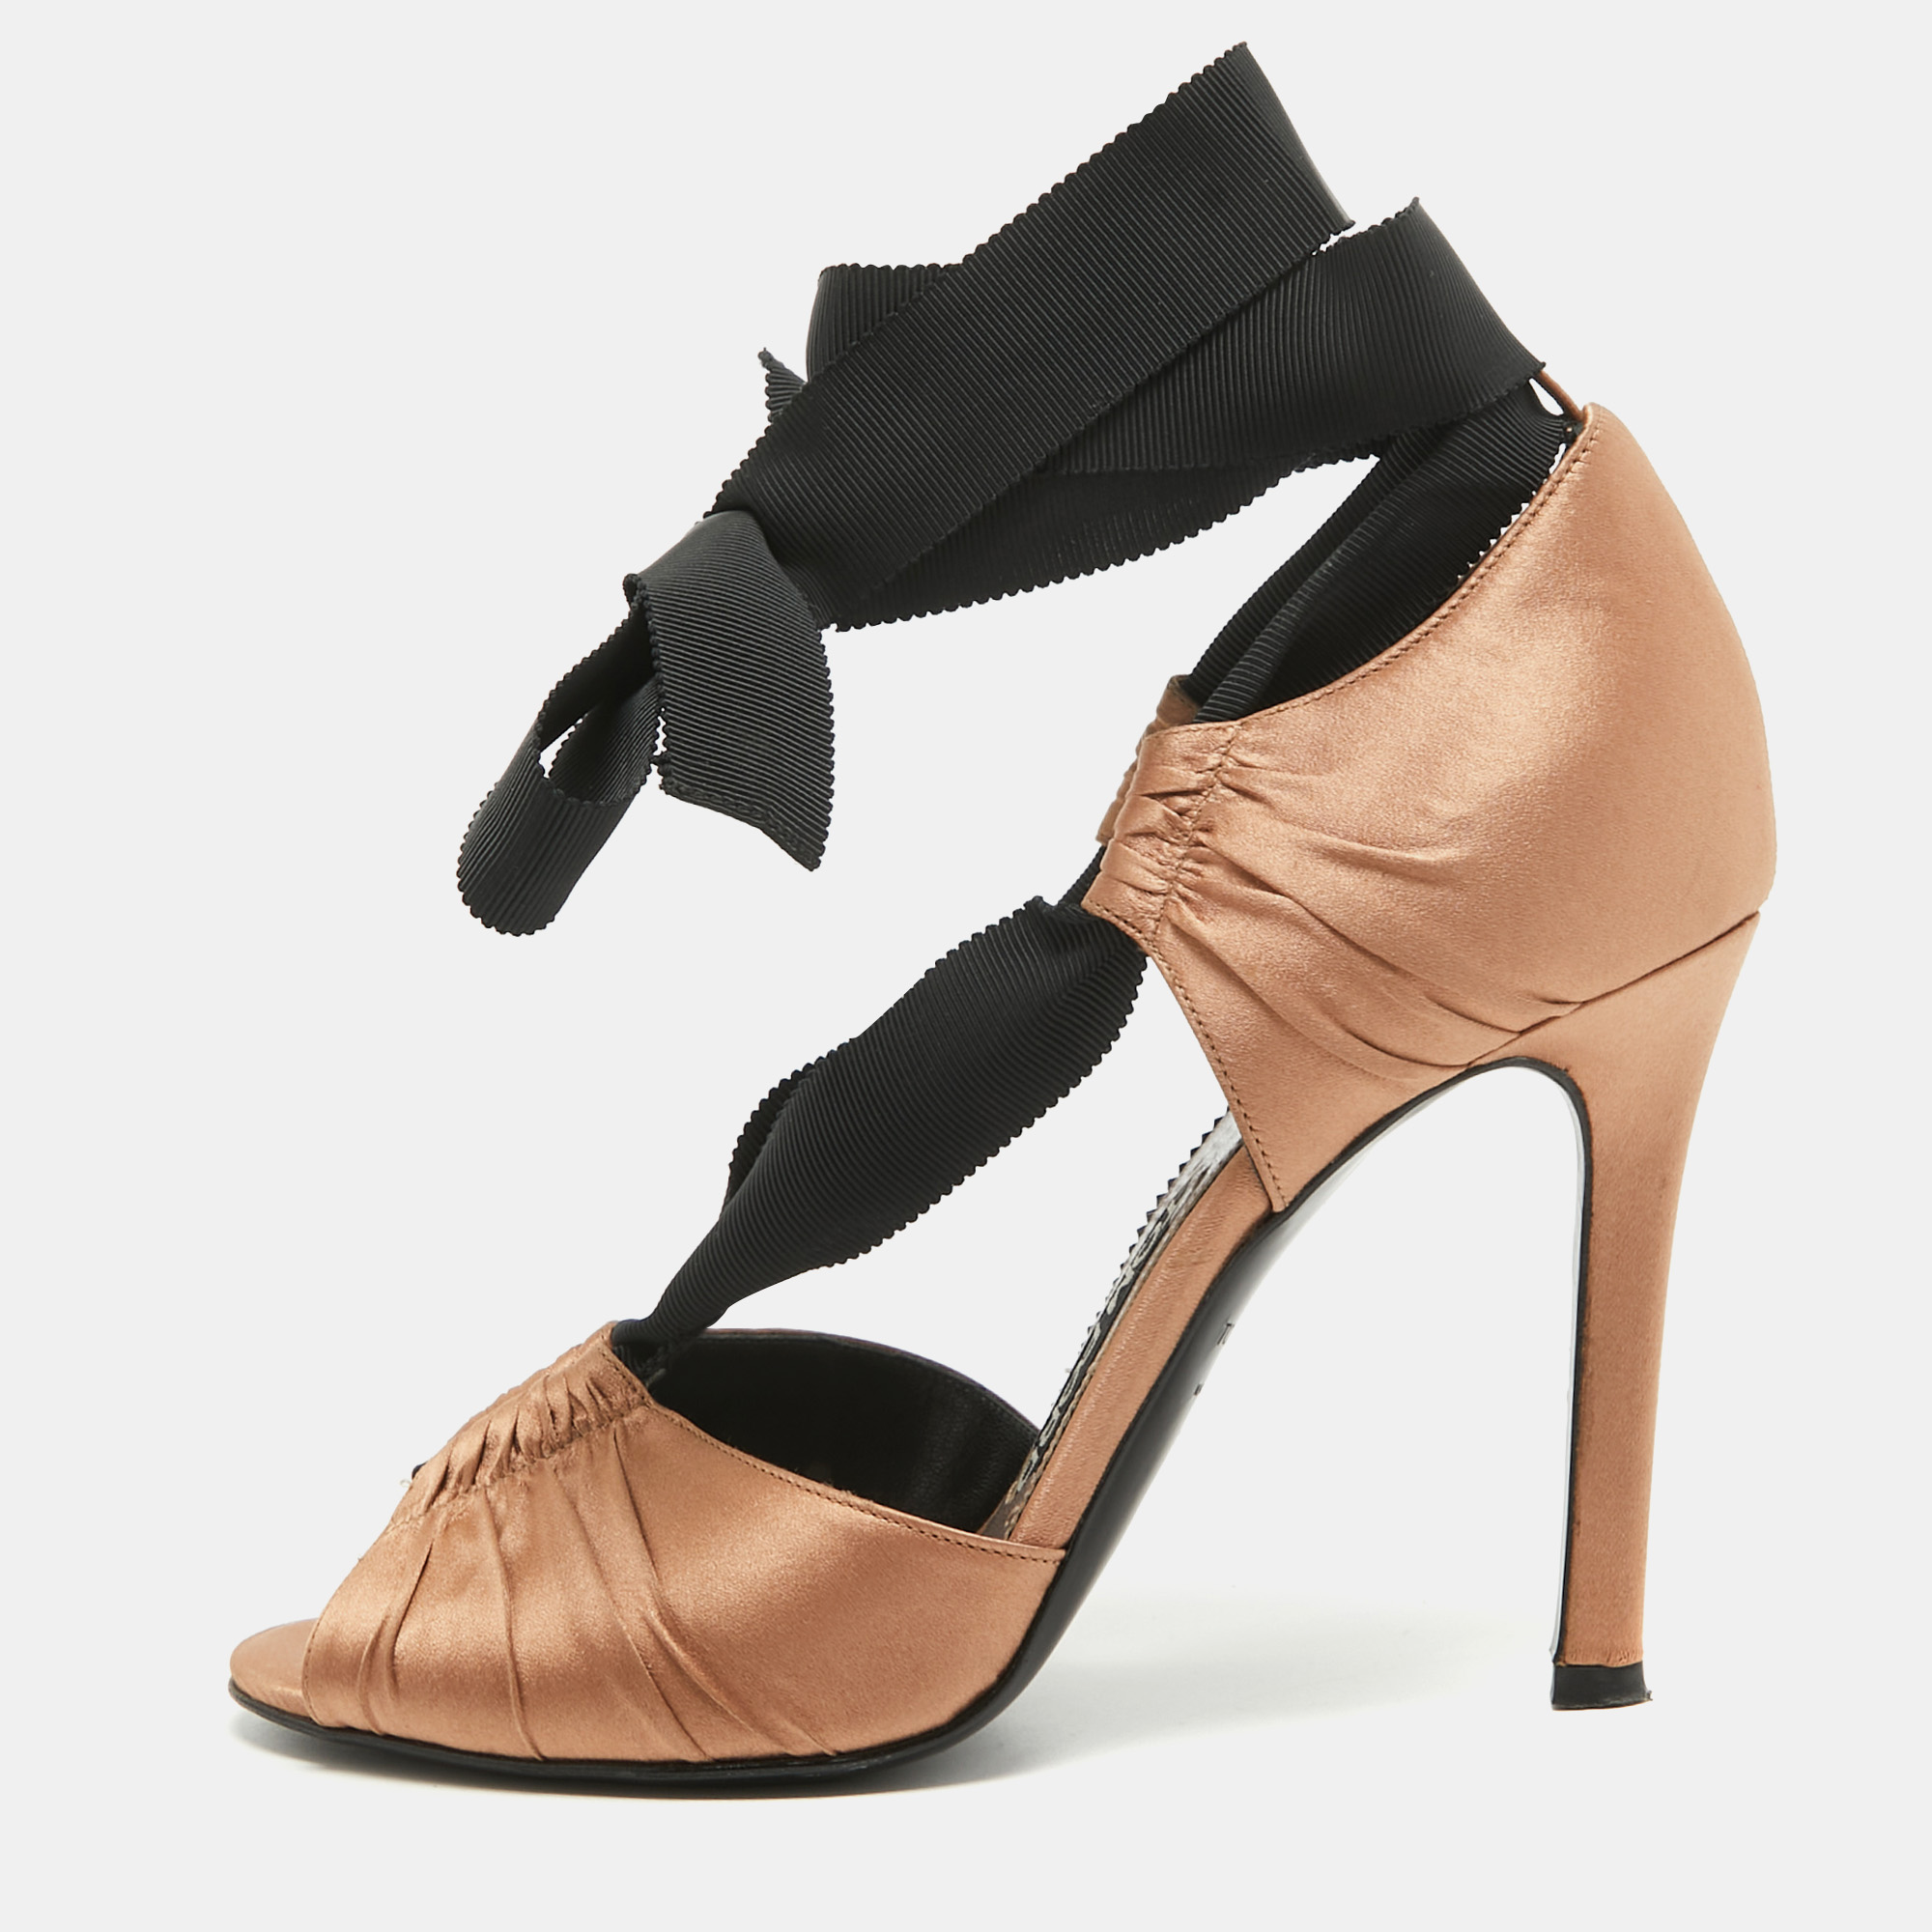 Tom ford gold satin d'orsay pumps size 37